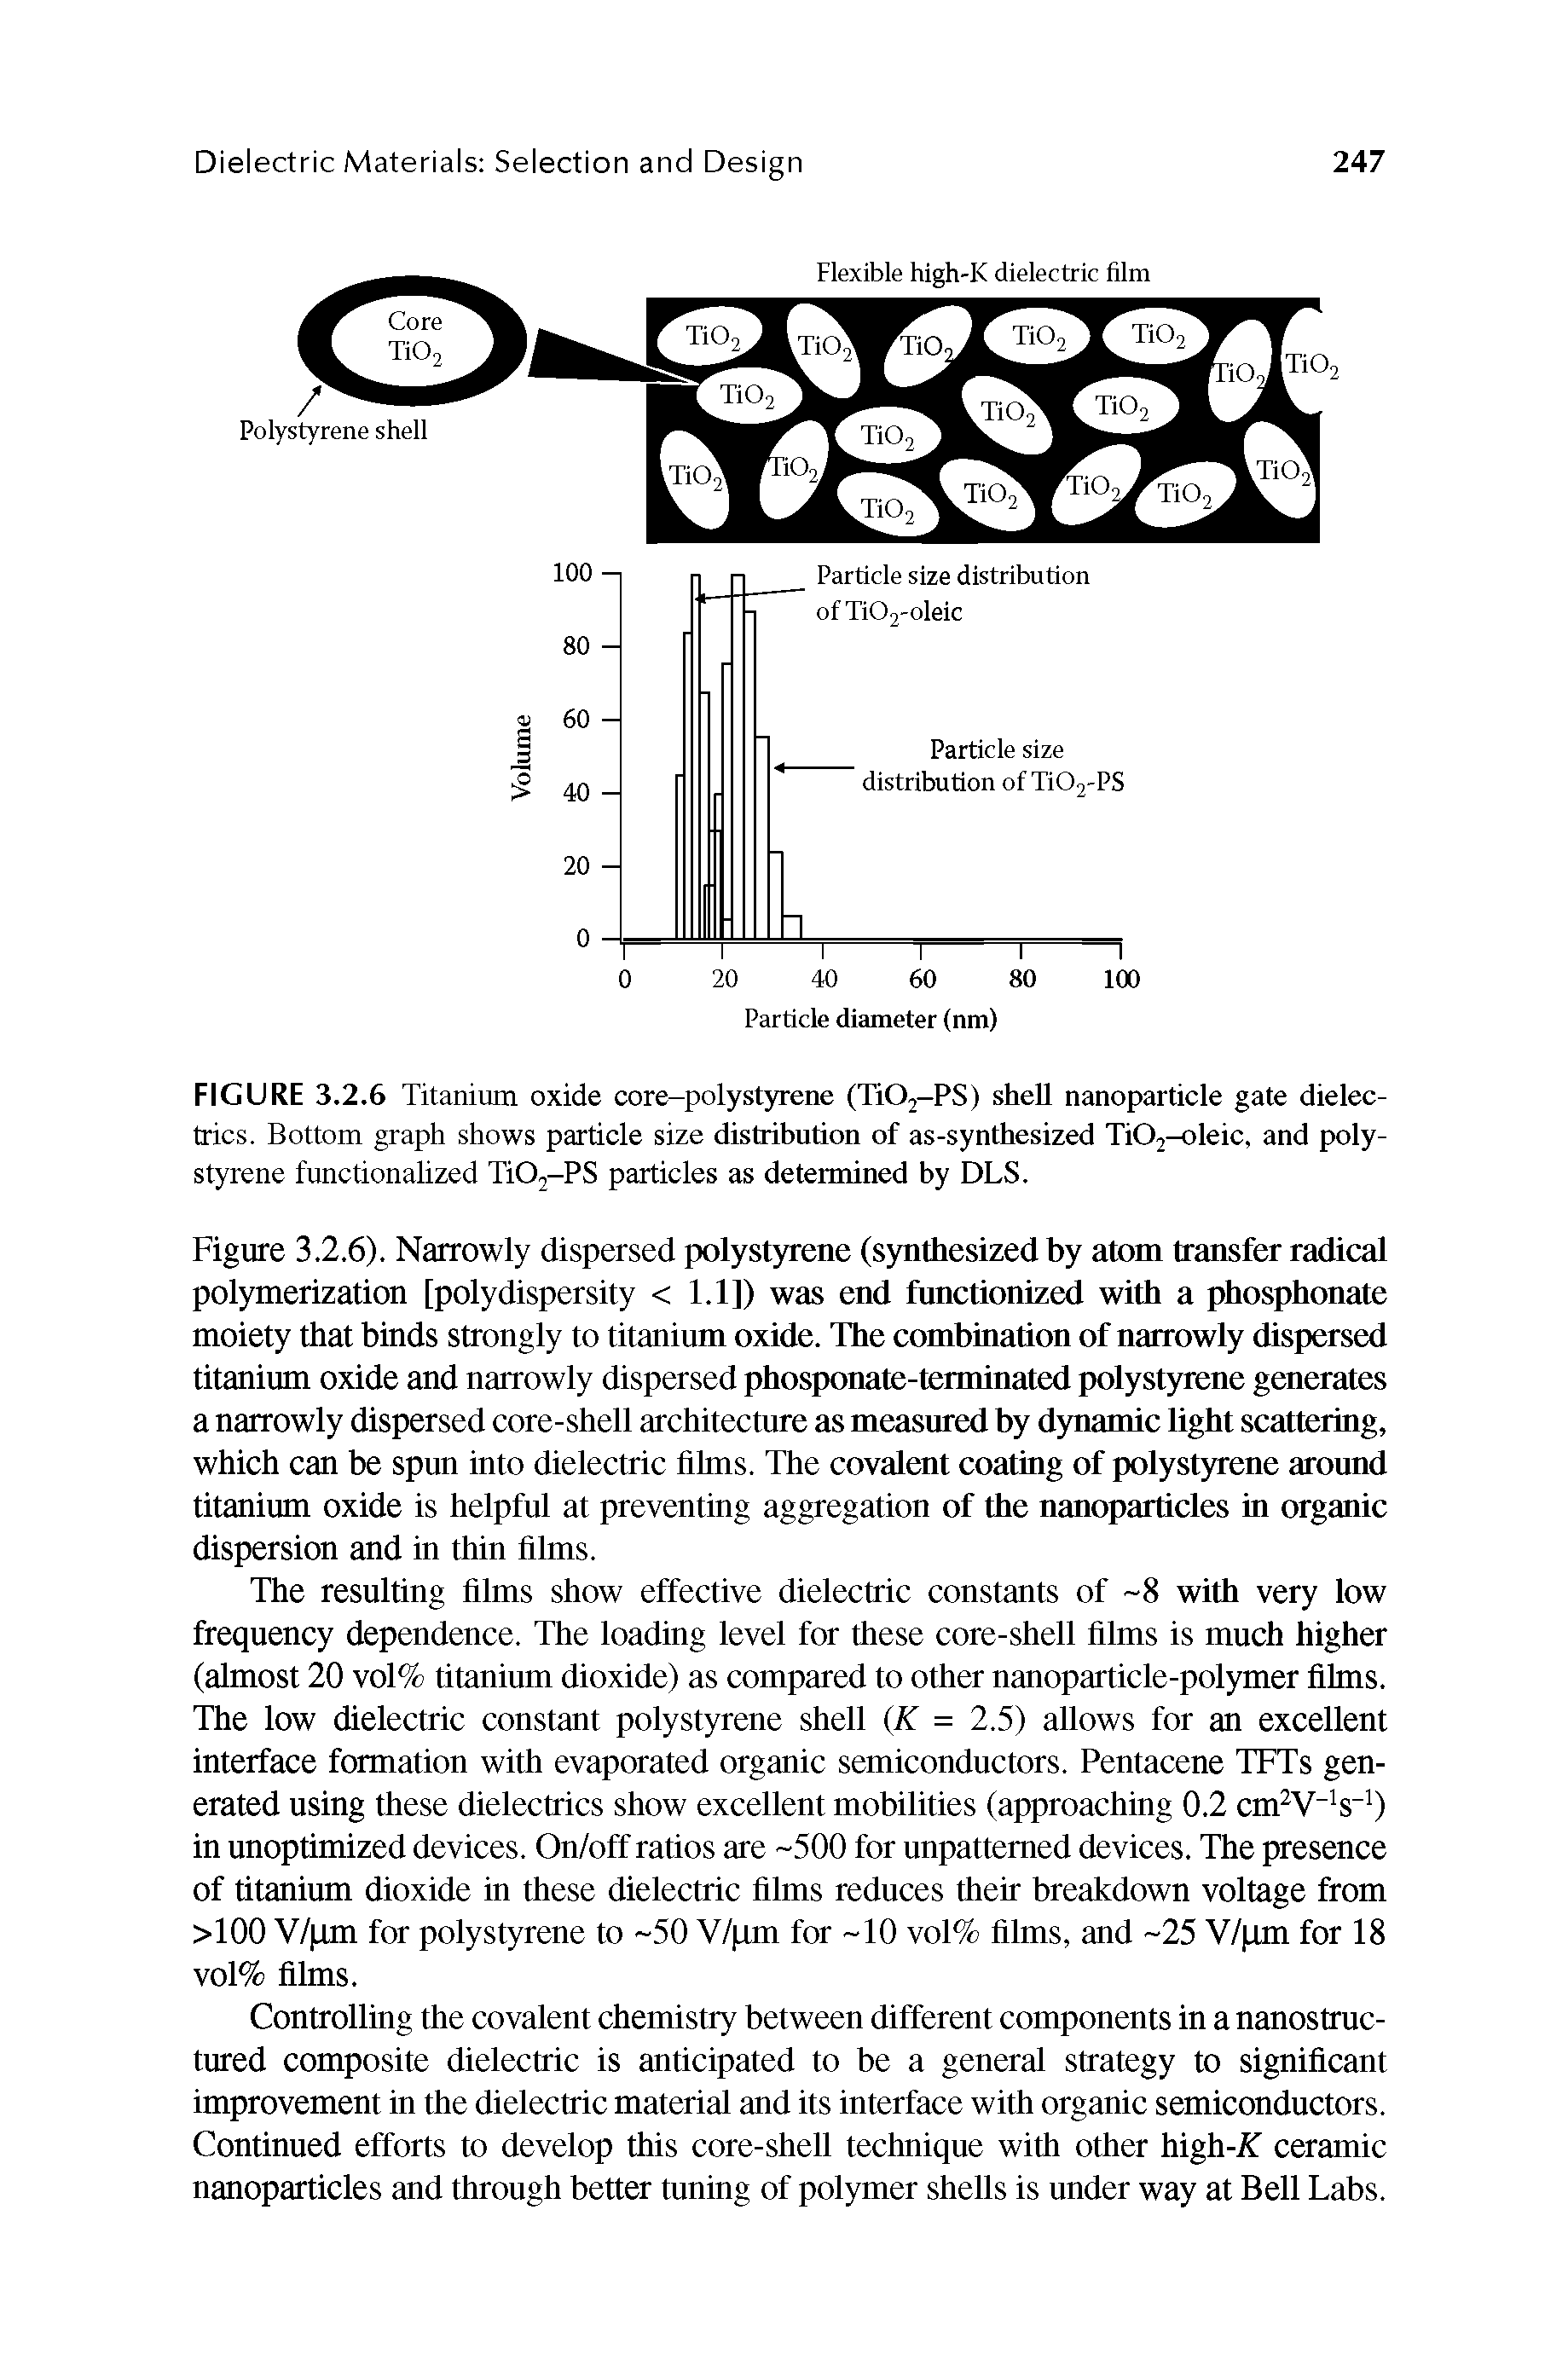 Figure 3.2.6). Narrowly dispersed polystyrene (synthesized by atom transfer radical polymerization [polydispersity < 1.1]) was end fnnctionized with a phosphonate moiety that binds strongly to titanium oxide. The combination of narrowly dispersed titanium oxide and narrowly dispersed phosponate-terminated polystyrene generates a narrowly dispersed core-shell architecture as measured by dynamic light scattering, which can be spun into dielectric films. The covalent coating of polystyrene around titanium oxide is helpful at preventing aggregation of the nanoparticles in organic dispersion and in thin films.